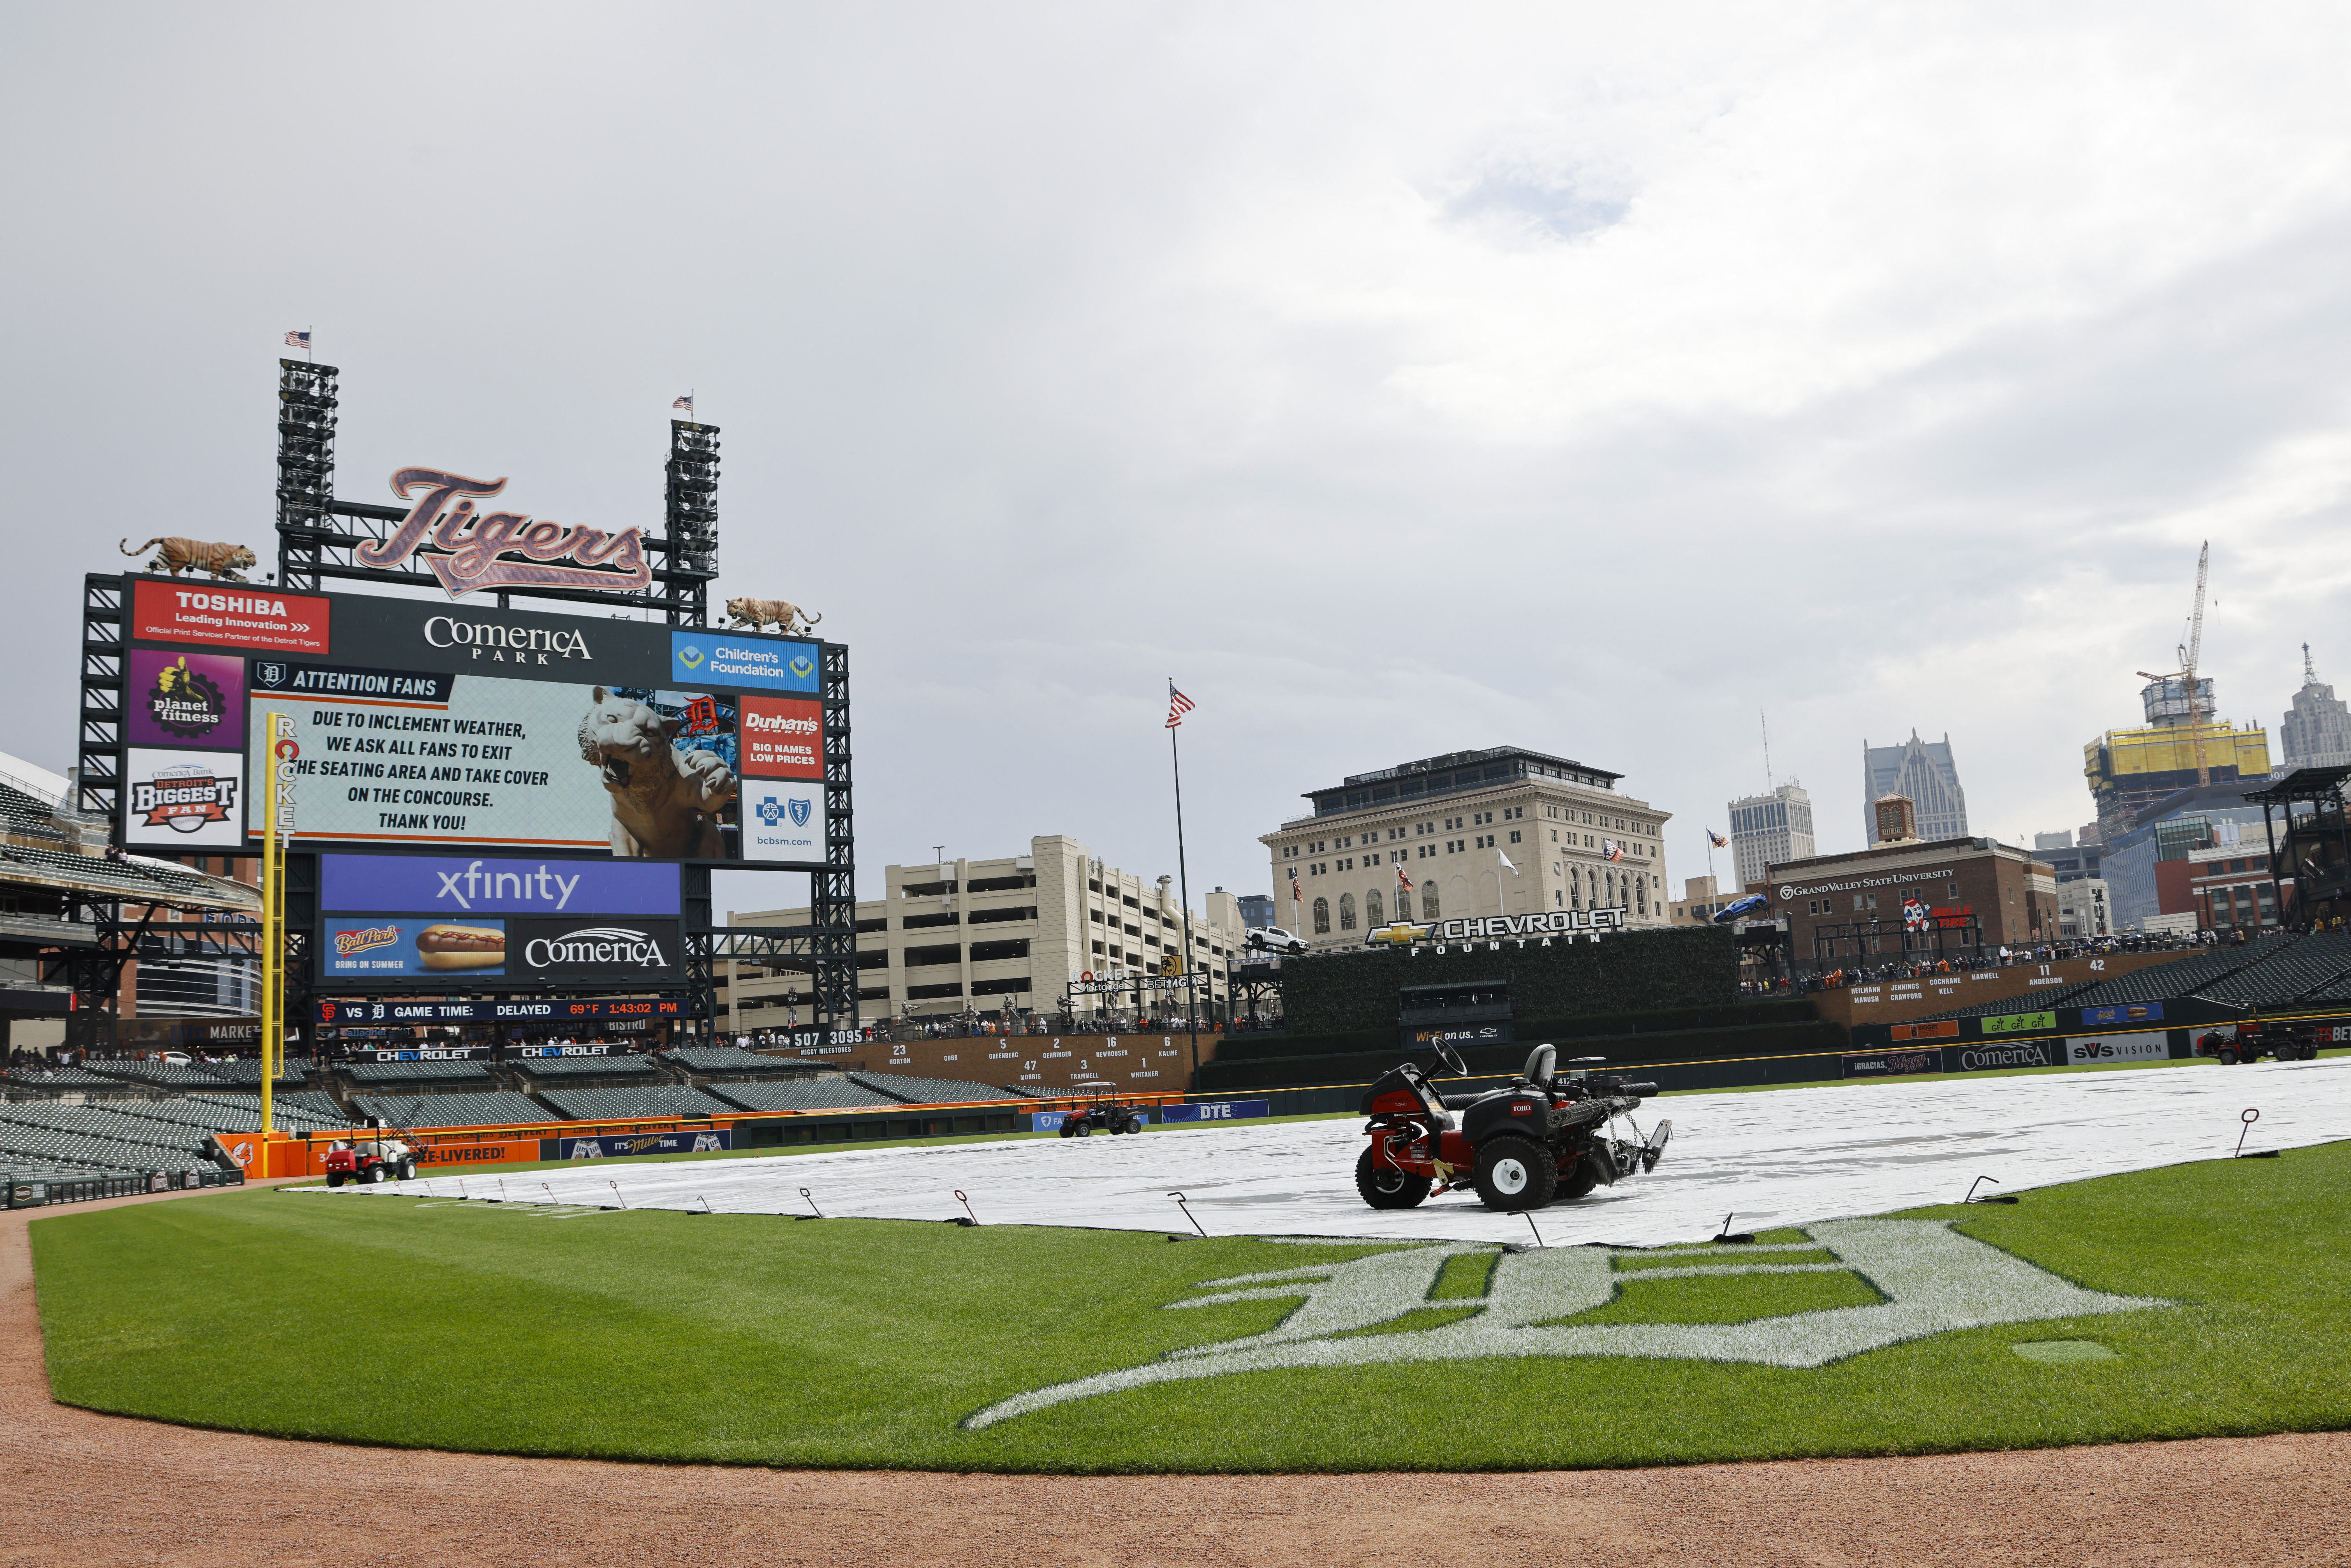 Giants-Tigers postponed after long weather delay